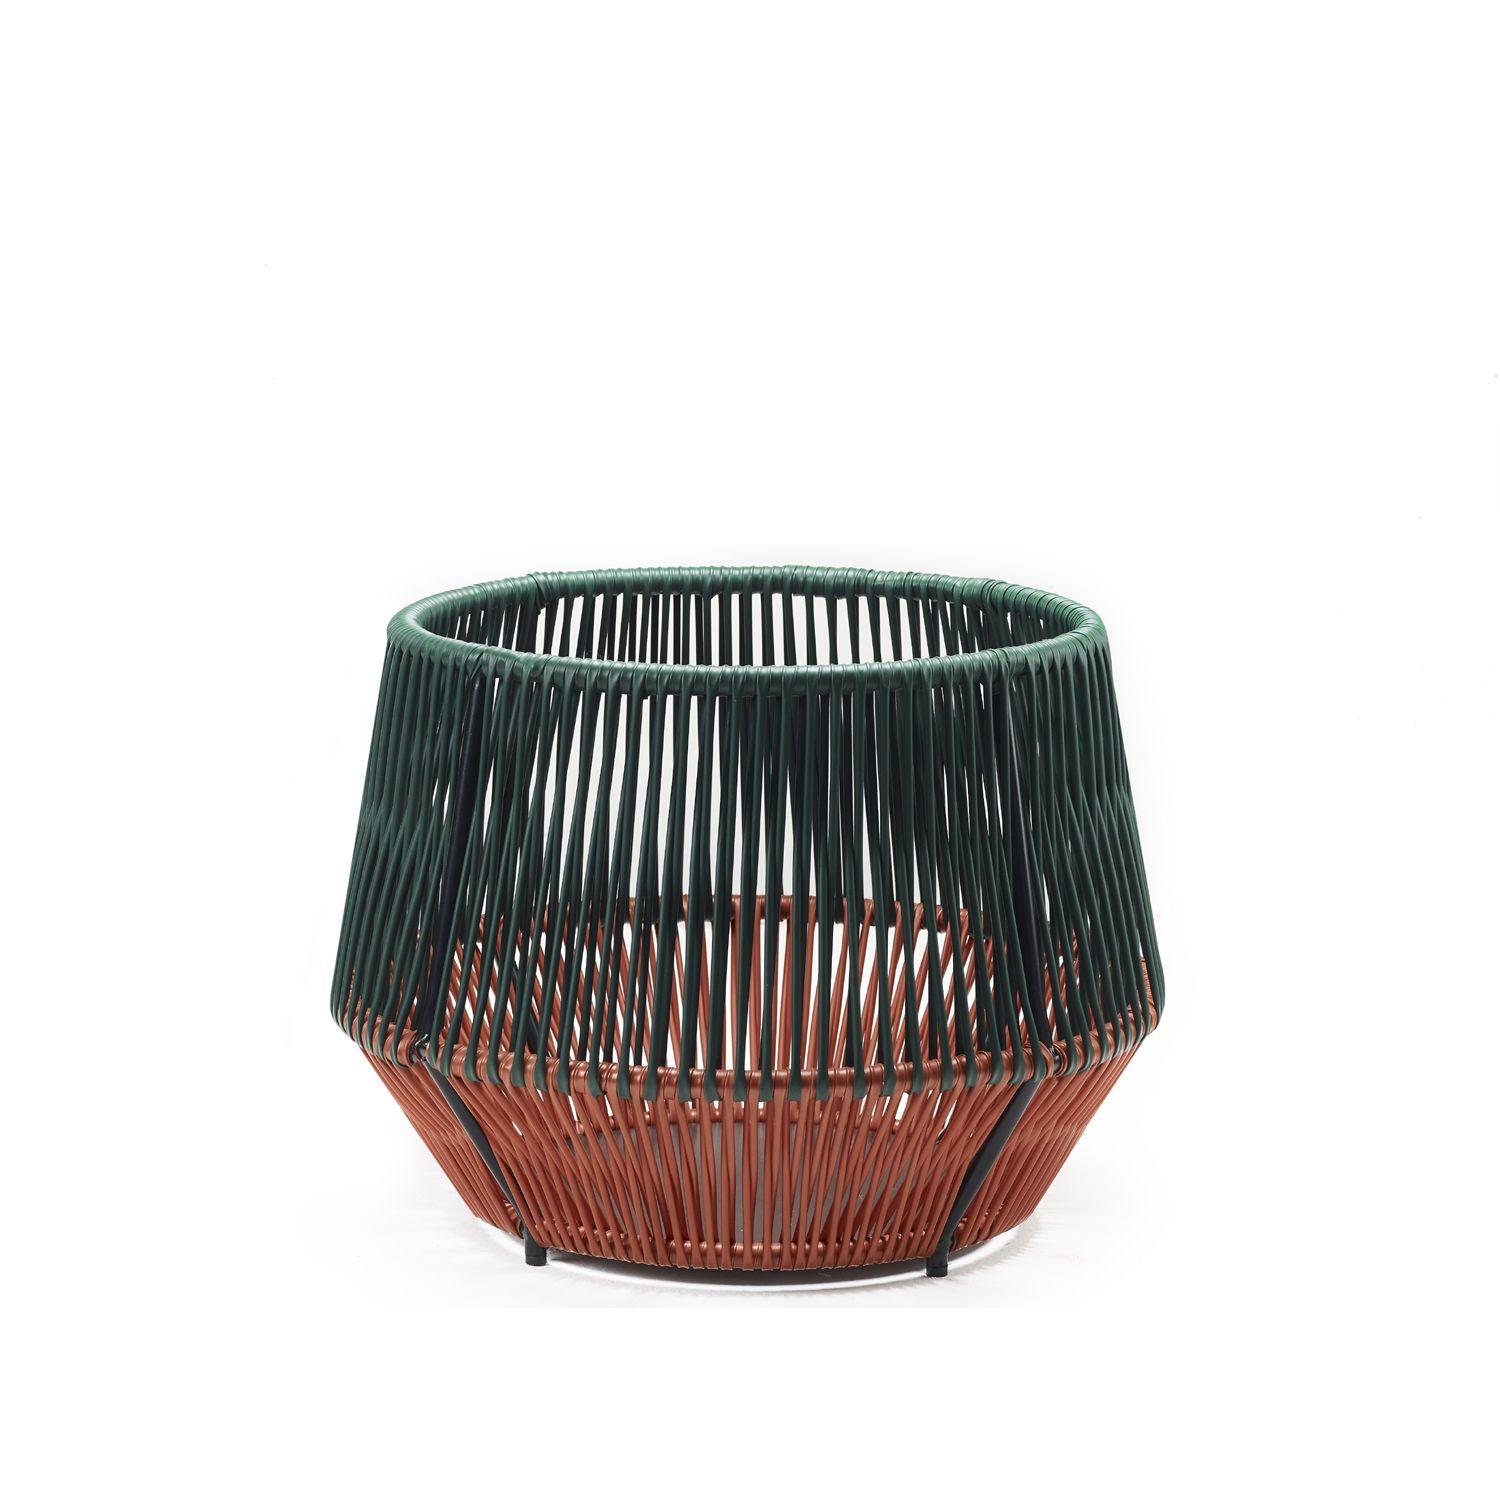 Material
Galvanized and powder coated tubular steel. PVC strings made from recycled plastic.
COLOR: moss green/ copper/ black
h 374 x Ø 440 mm

The Caribe Chic Basket is an elegant design by Sebastian Herkner and can be used indoors and outdoors as